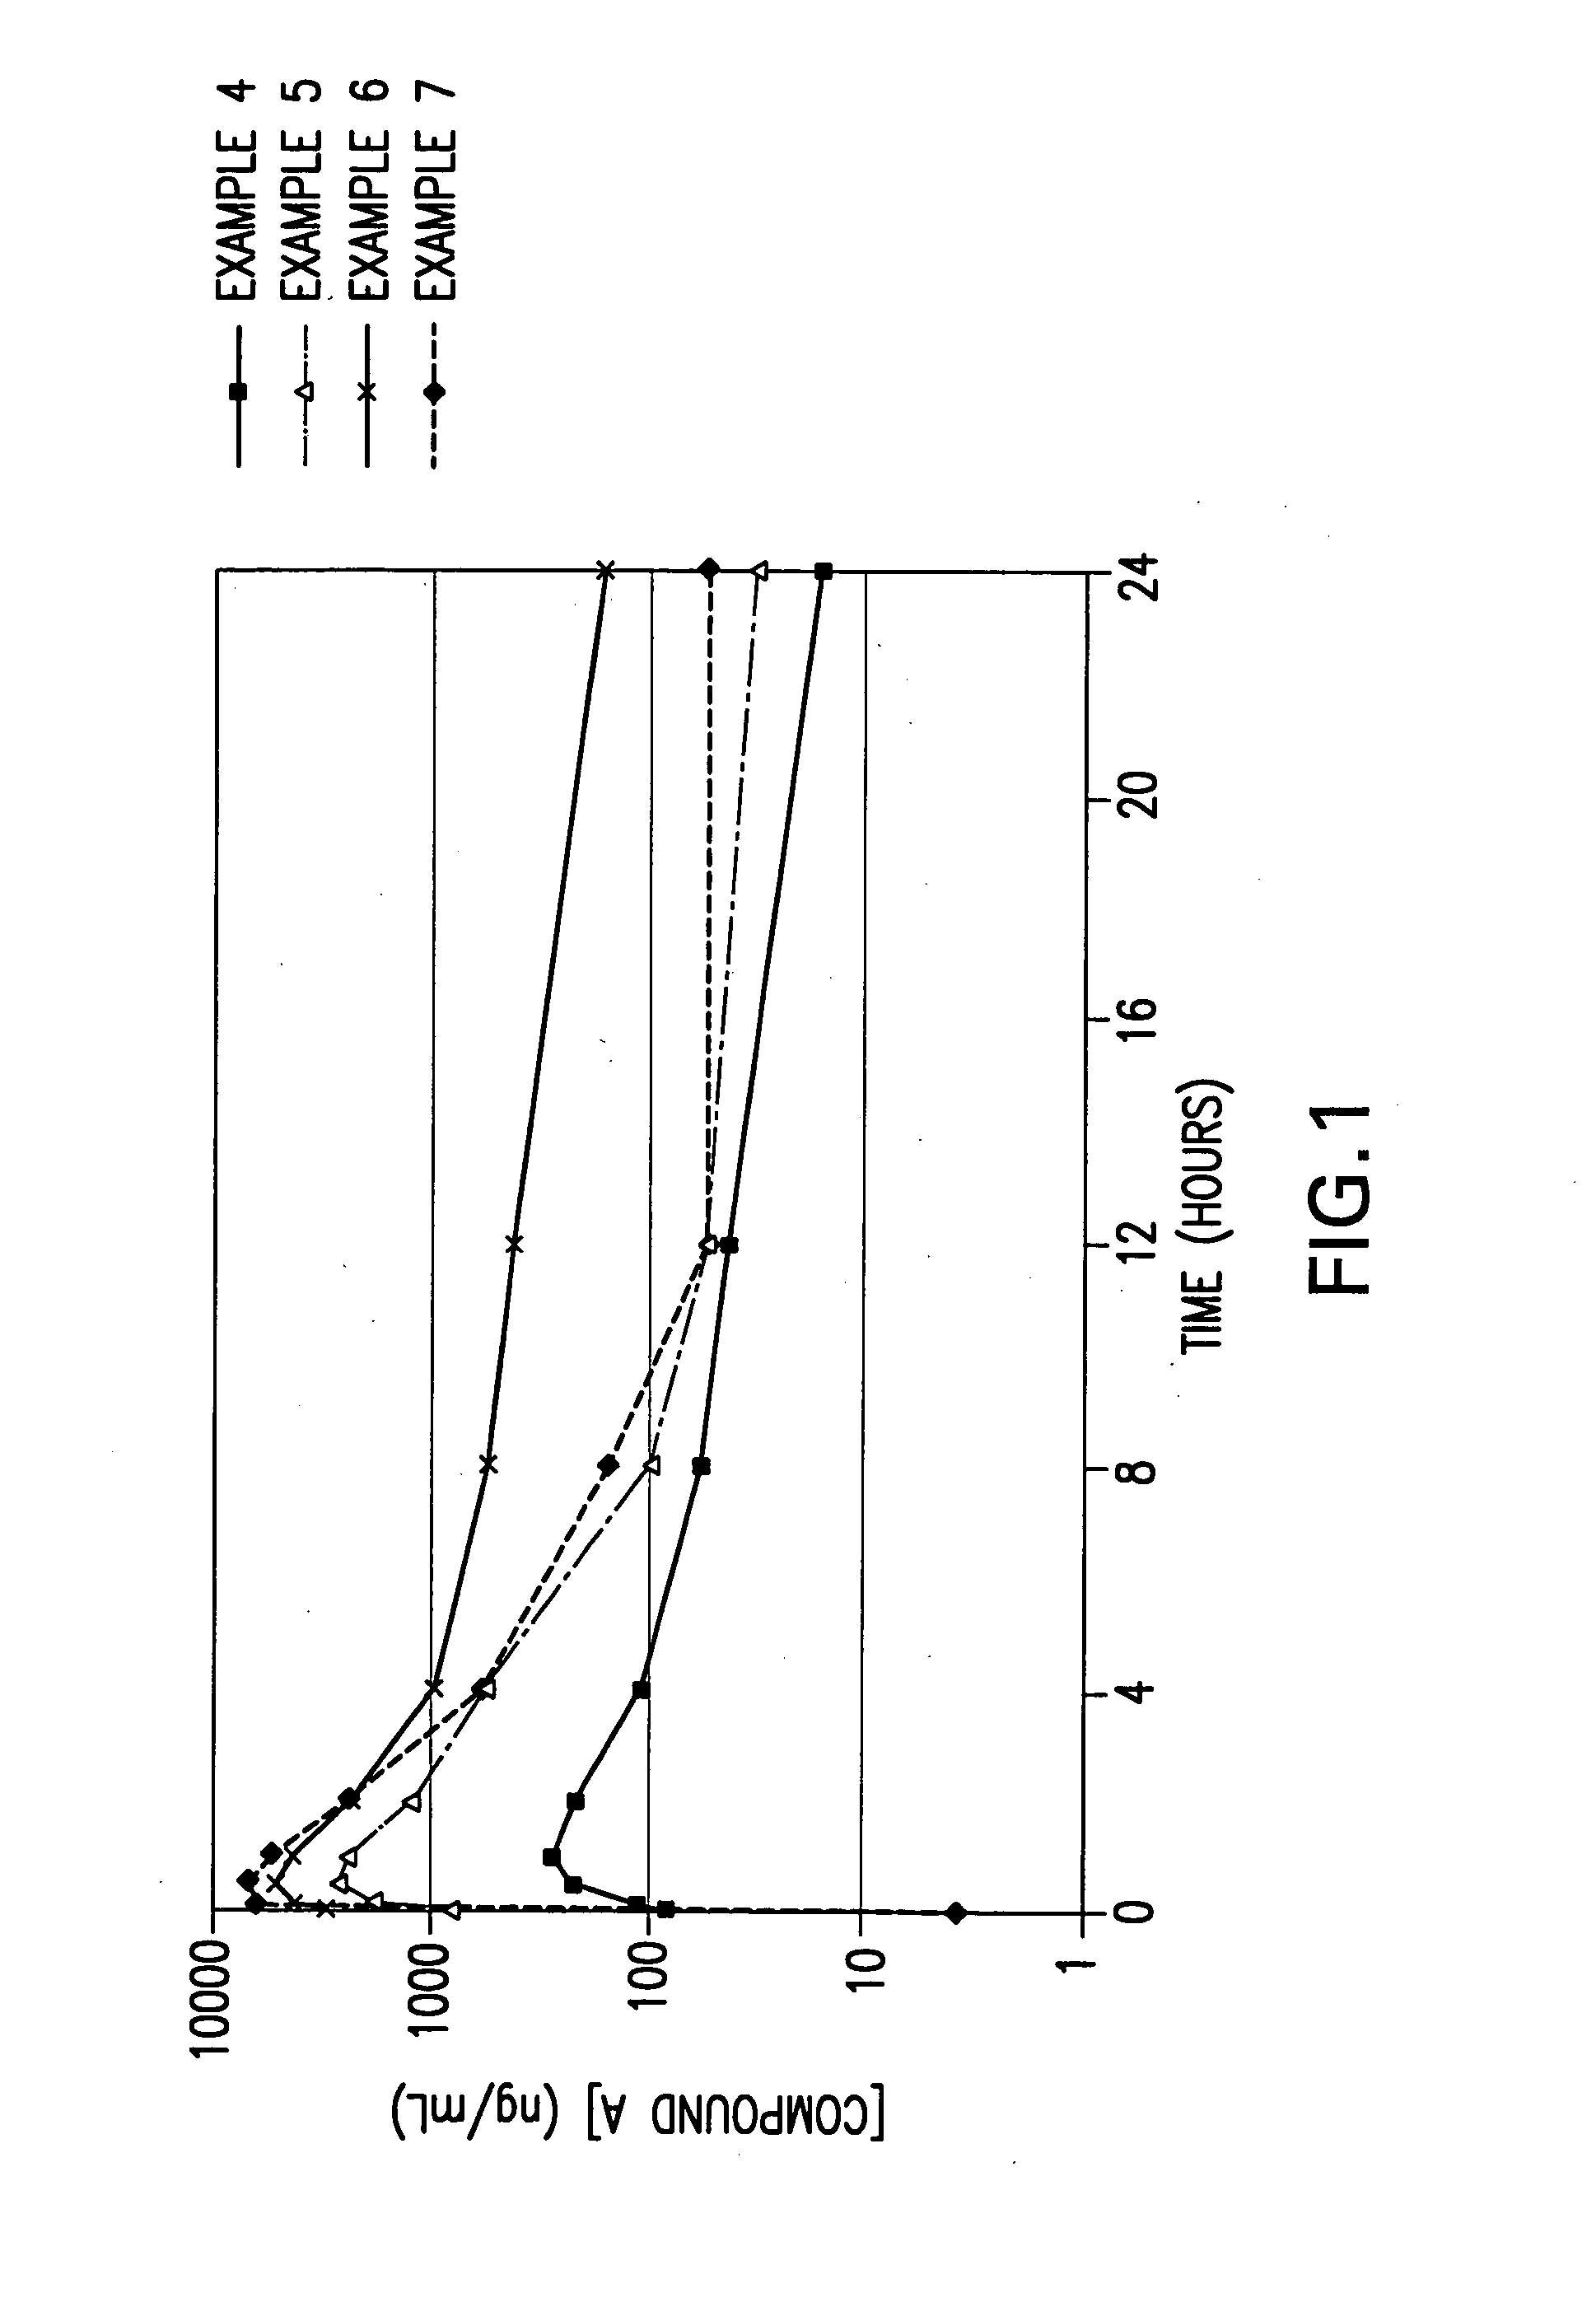 Pharmaceutical compositions for intranasal administration of [2-(8,9-dioxo-2,6-diazabicyclo[5.2.0]non-1(7)-en-2-yl)alkyl] phosphonic acid and derivatives and methods of use thereof